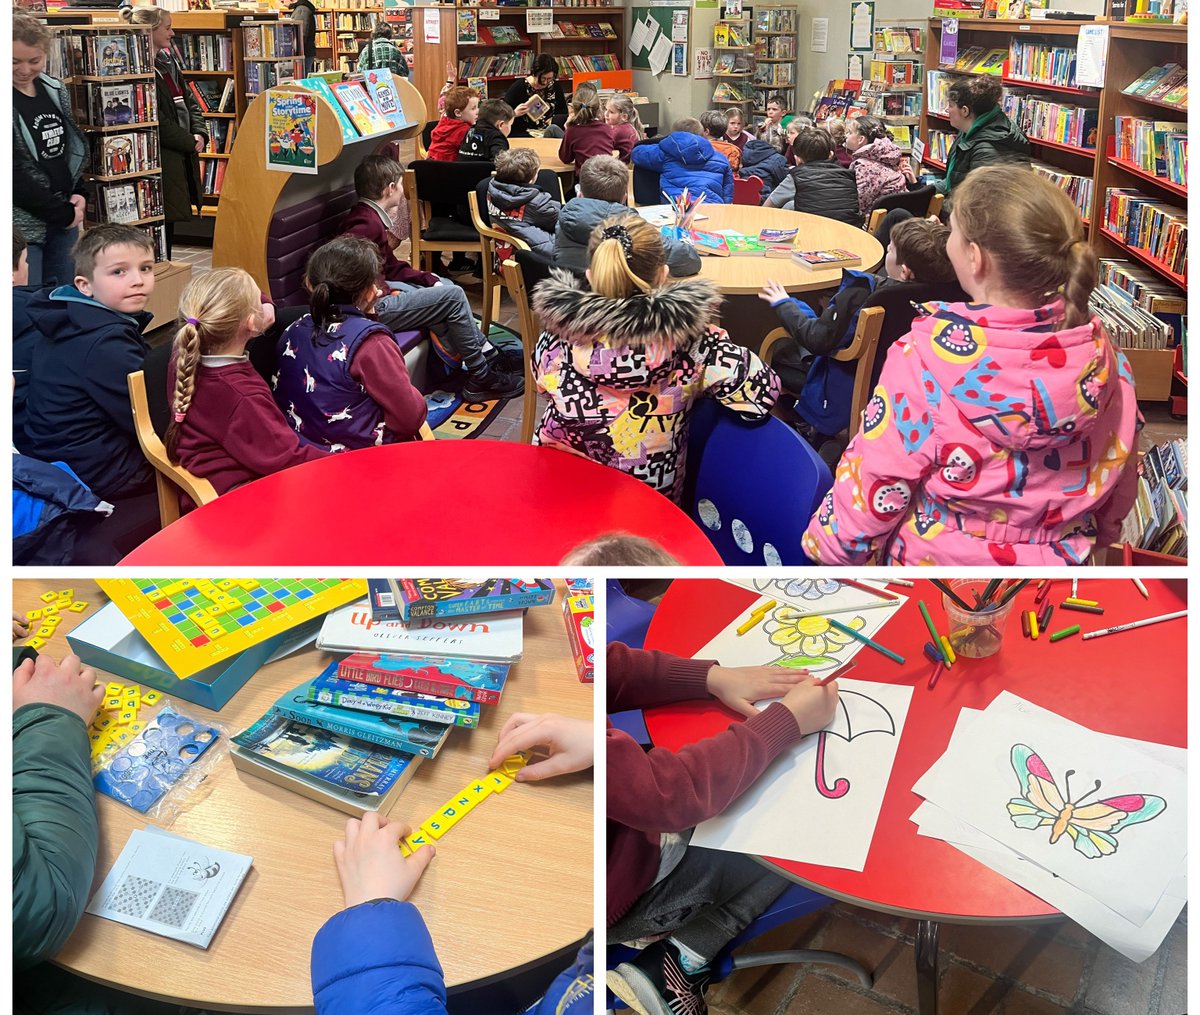 Recently #BantryLibrary were delighted to have 4 classes from Dromore school visit for #SpringintoStorytime. They had a fun filled morning of stories, games, colouring, jokes and reading.
#TakeACloserLook 
@LibrariesIre